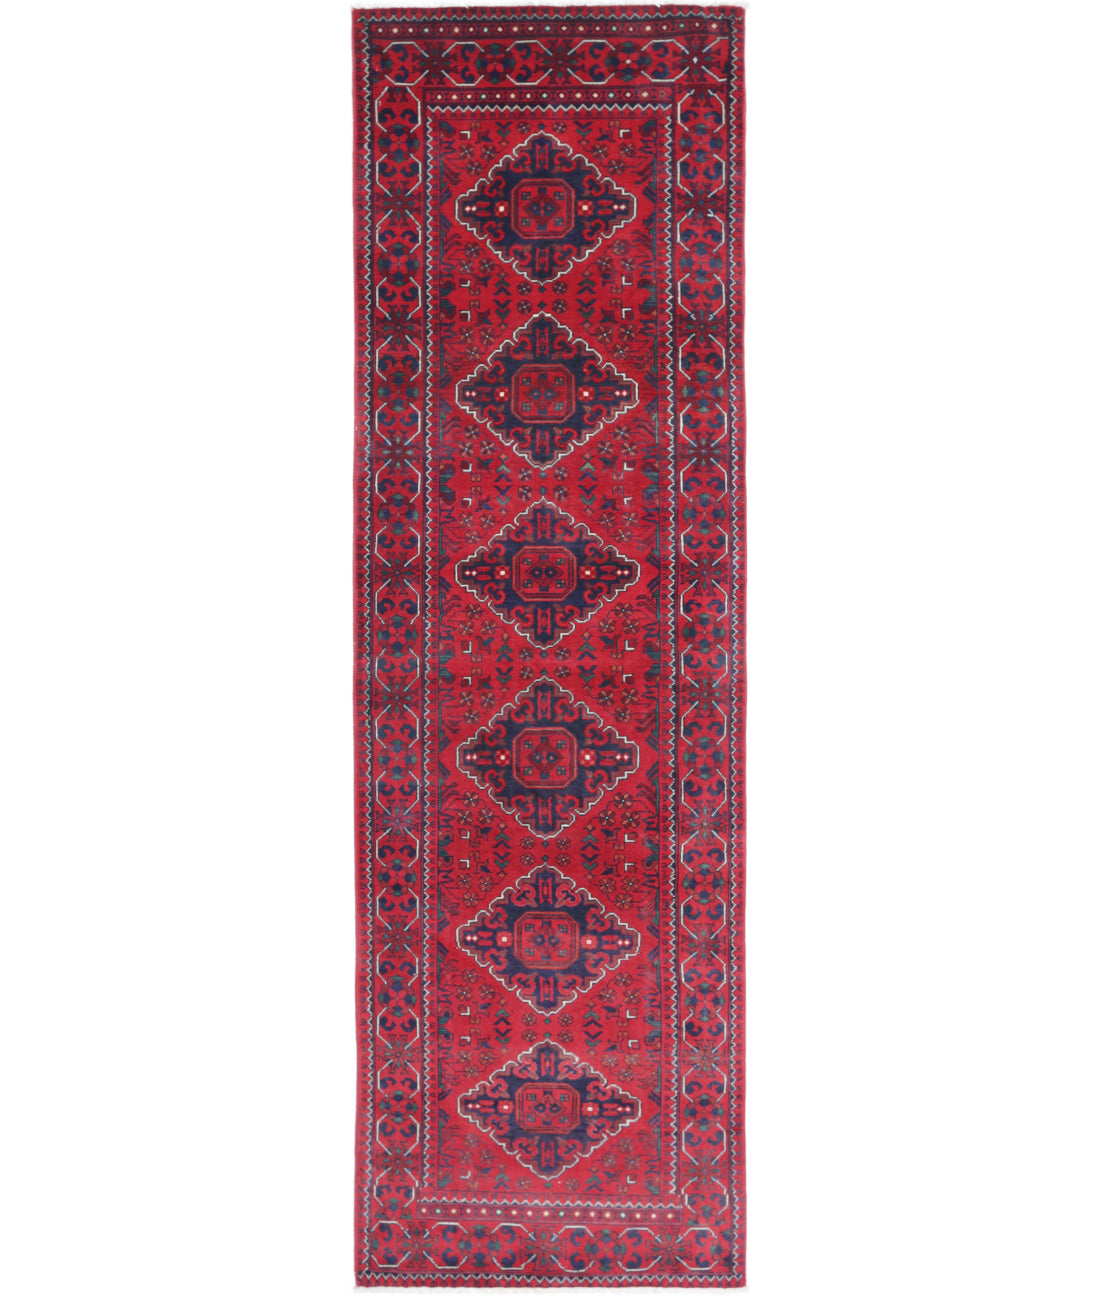 Hand Knotted Afghan Khamyab Wool Rug - 2&#39;6&#39;&#39; x 9&#39;0&#39;&#39; 2&#39;6&#39;&#39; x 9&#39;0&#39;&#39; (75 X 270) / Red / Red